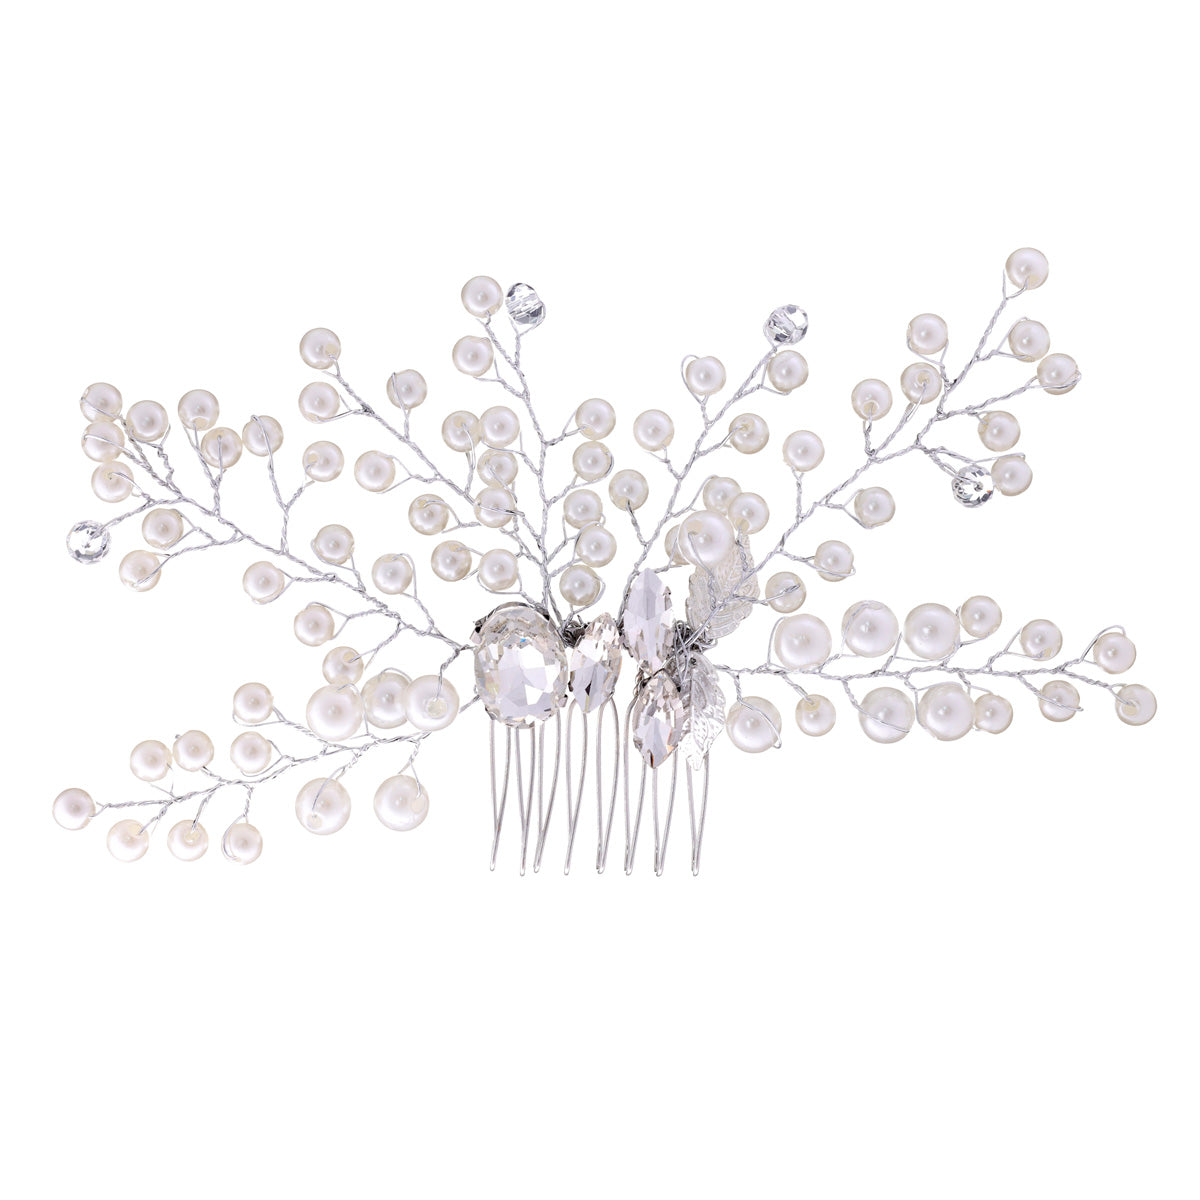 Shaped side comb with beads and rhinestones 1pc (16cm x 8.5cm)